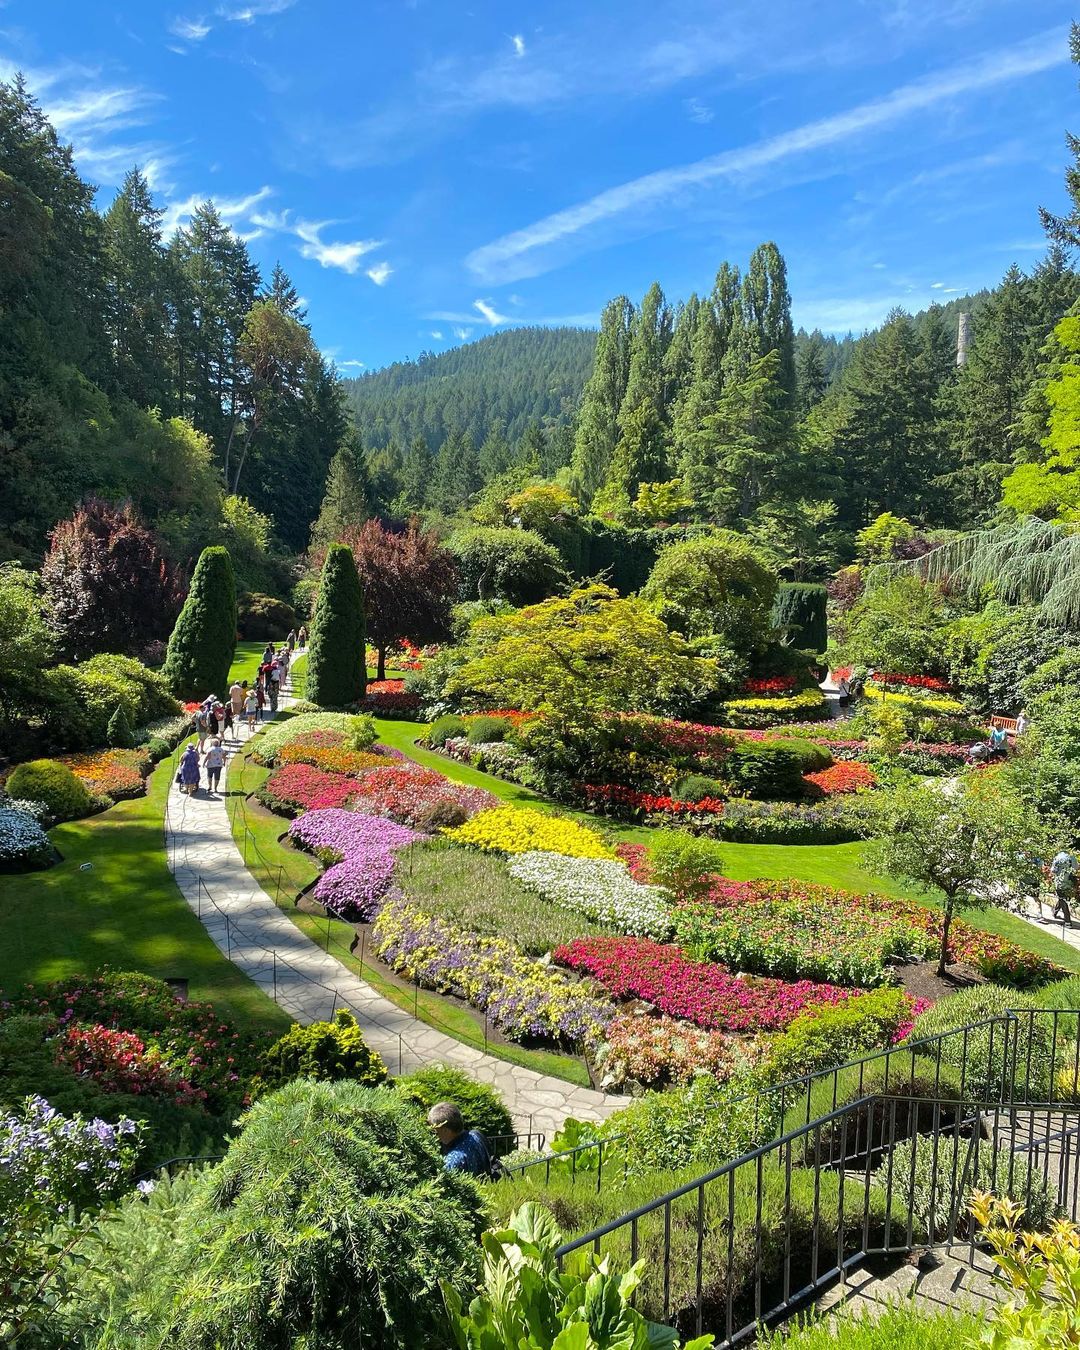 photo by 🍓 caption reads: First time visiting Le Butchart Gardens 💕🌈🌹🌈💕
.
.
.
.
.
#flowers #flowerphotography #butchartgardens #victoriabc #vancouverisland #vanisland #nature #scenery #scenic #landscape #amateurphotography #garden #butchartgardensvictoriabc